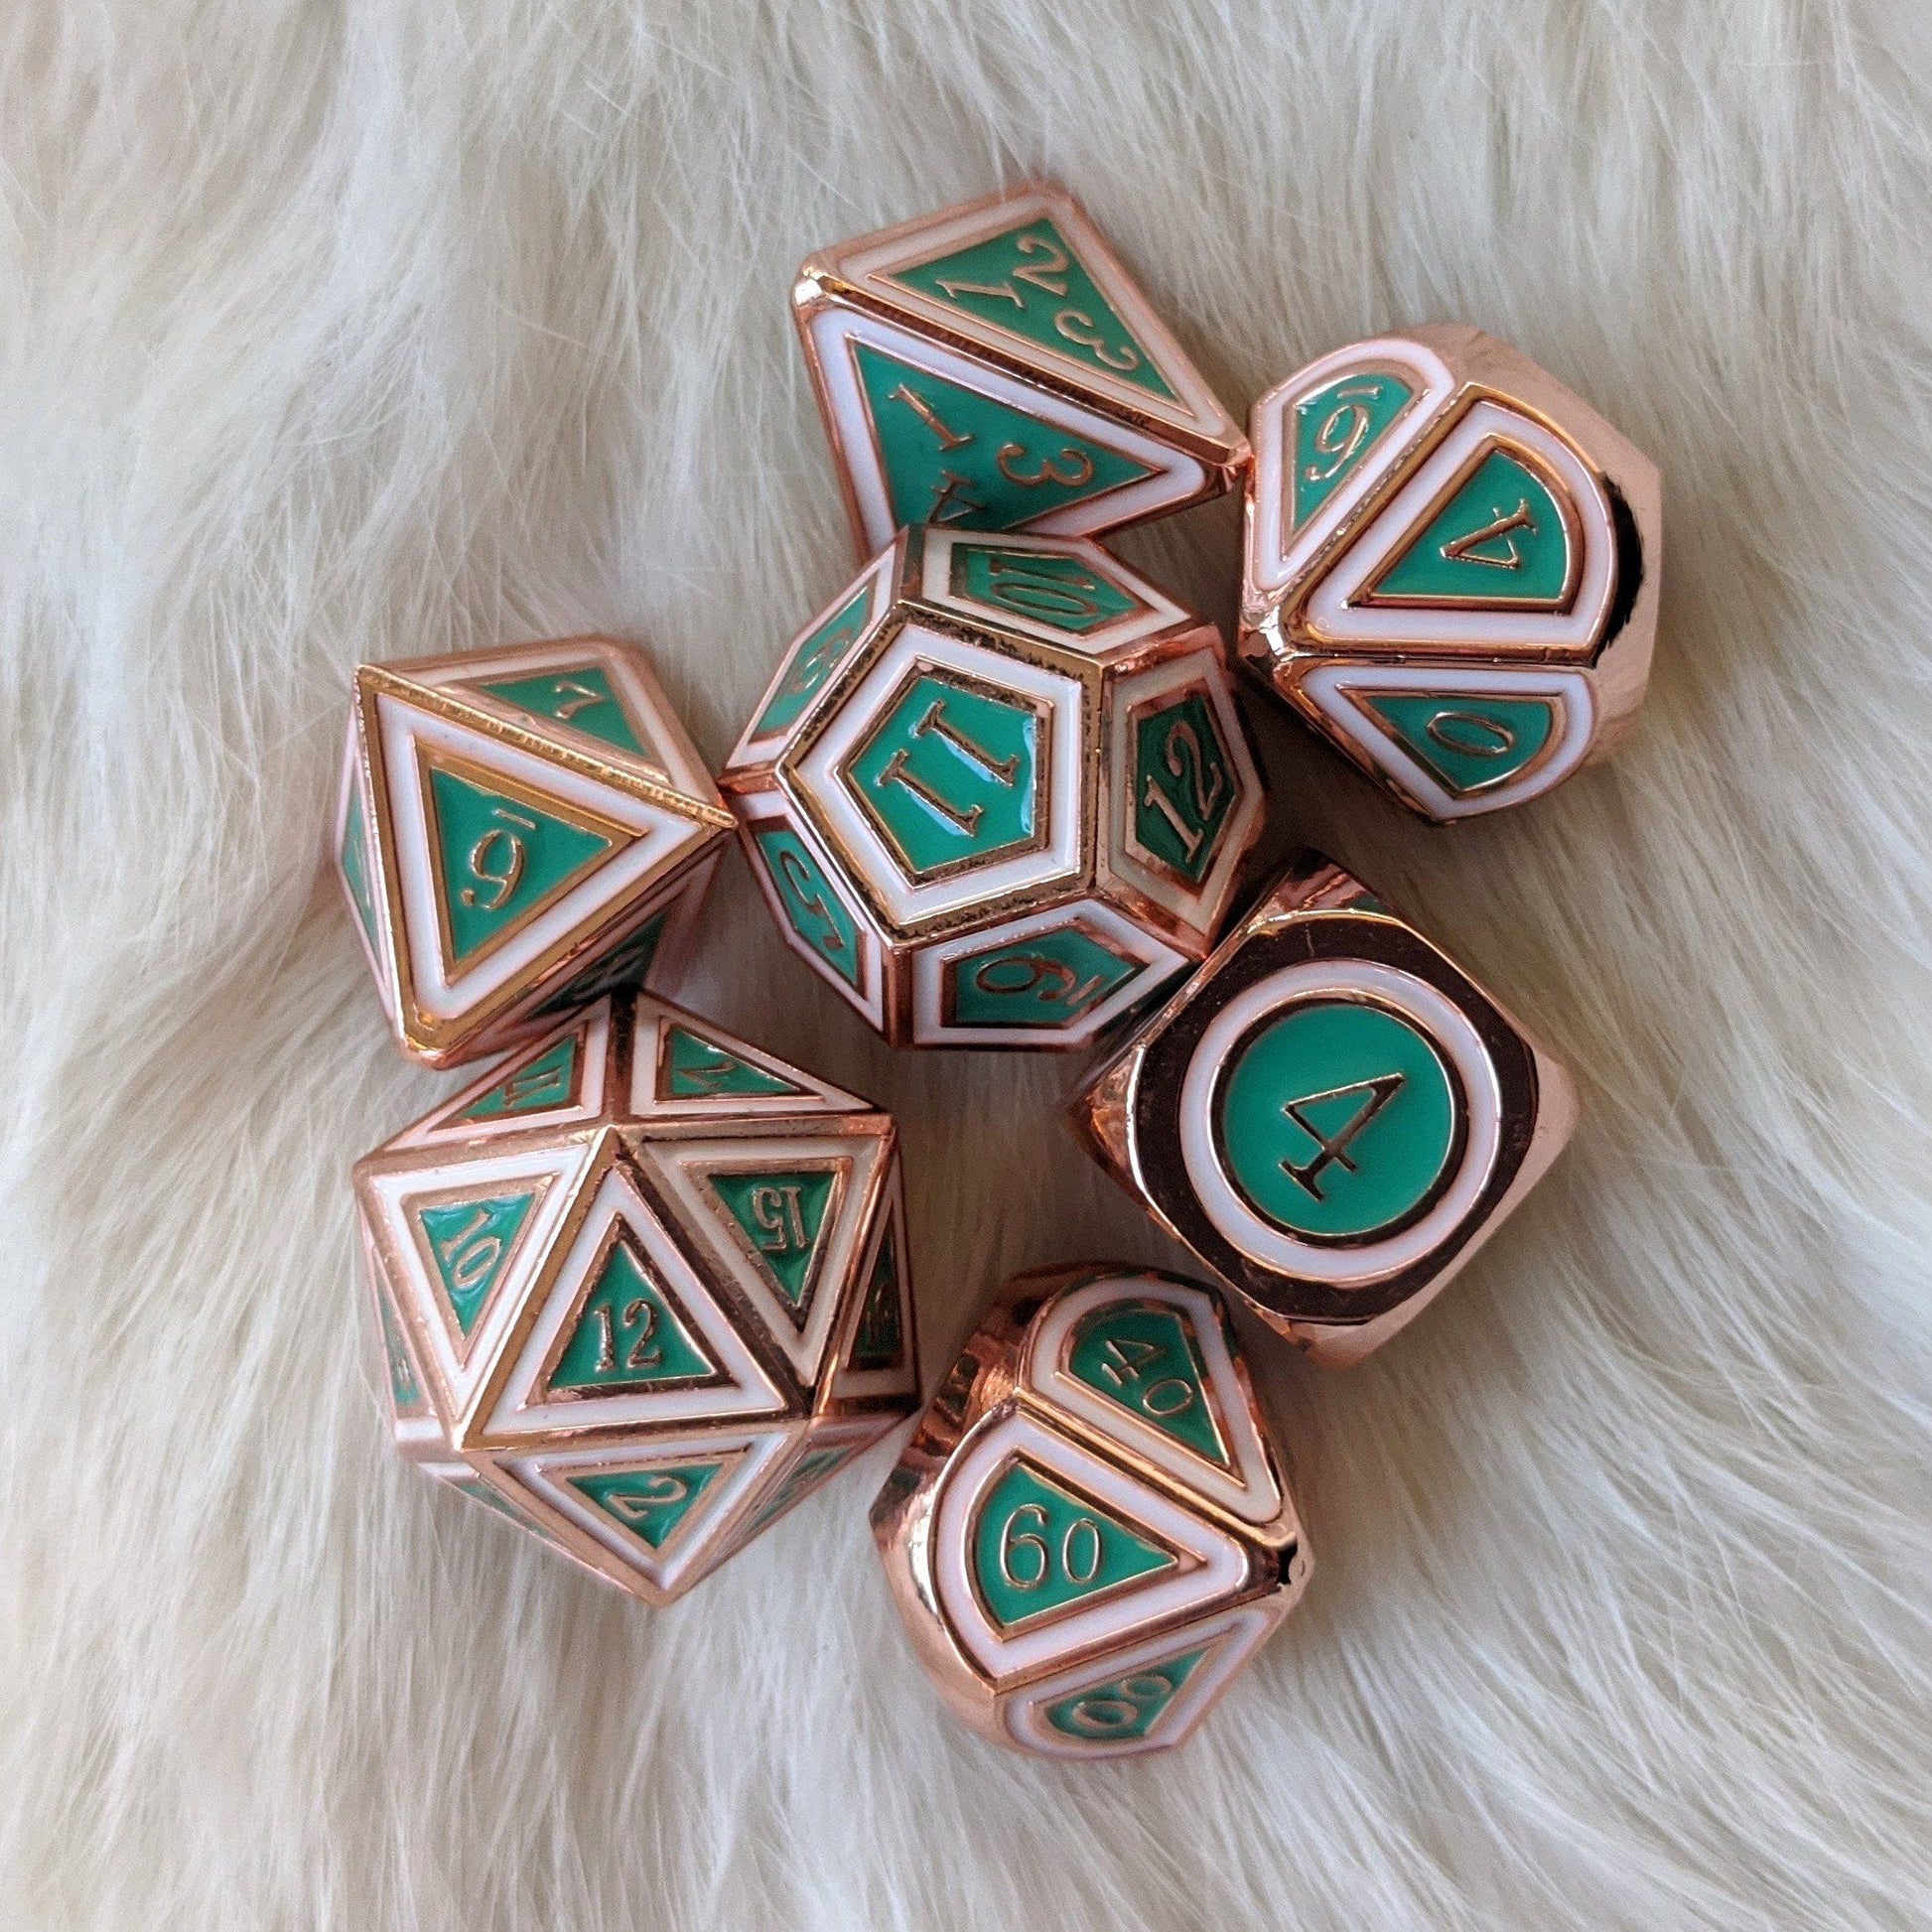 Eternal Metal Dice Set. Copper Plated Green and White - CozyGamer